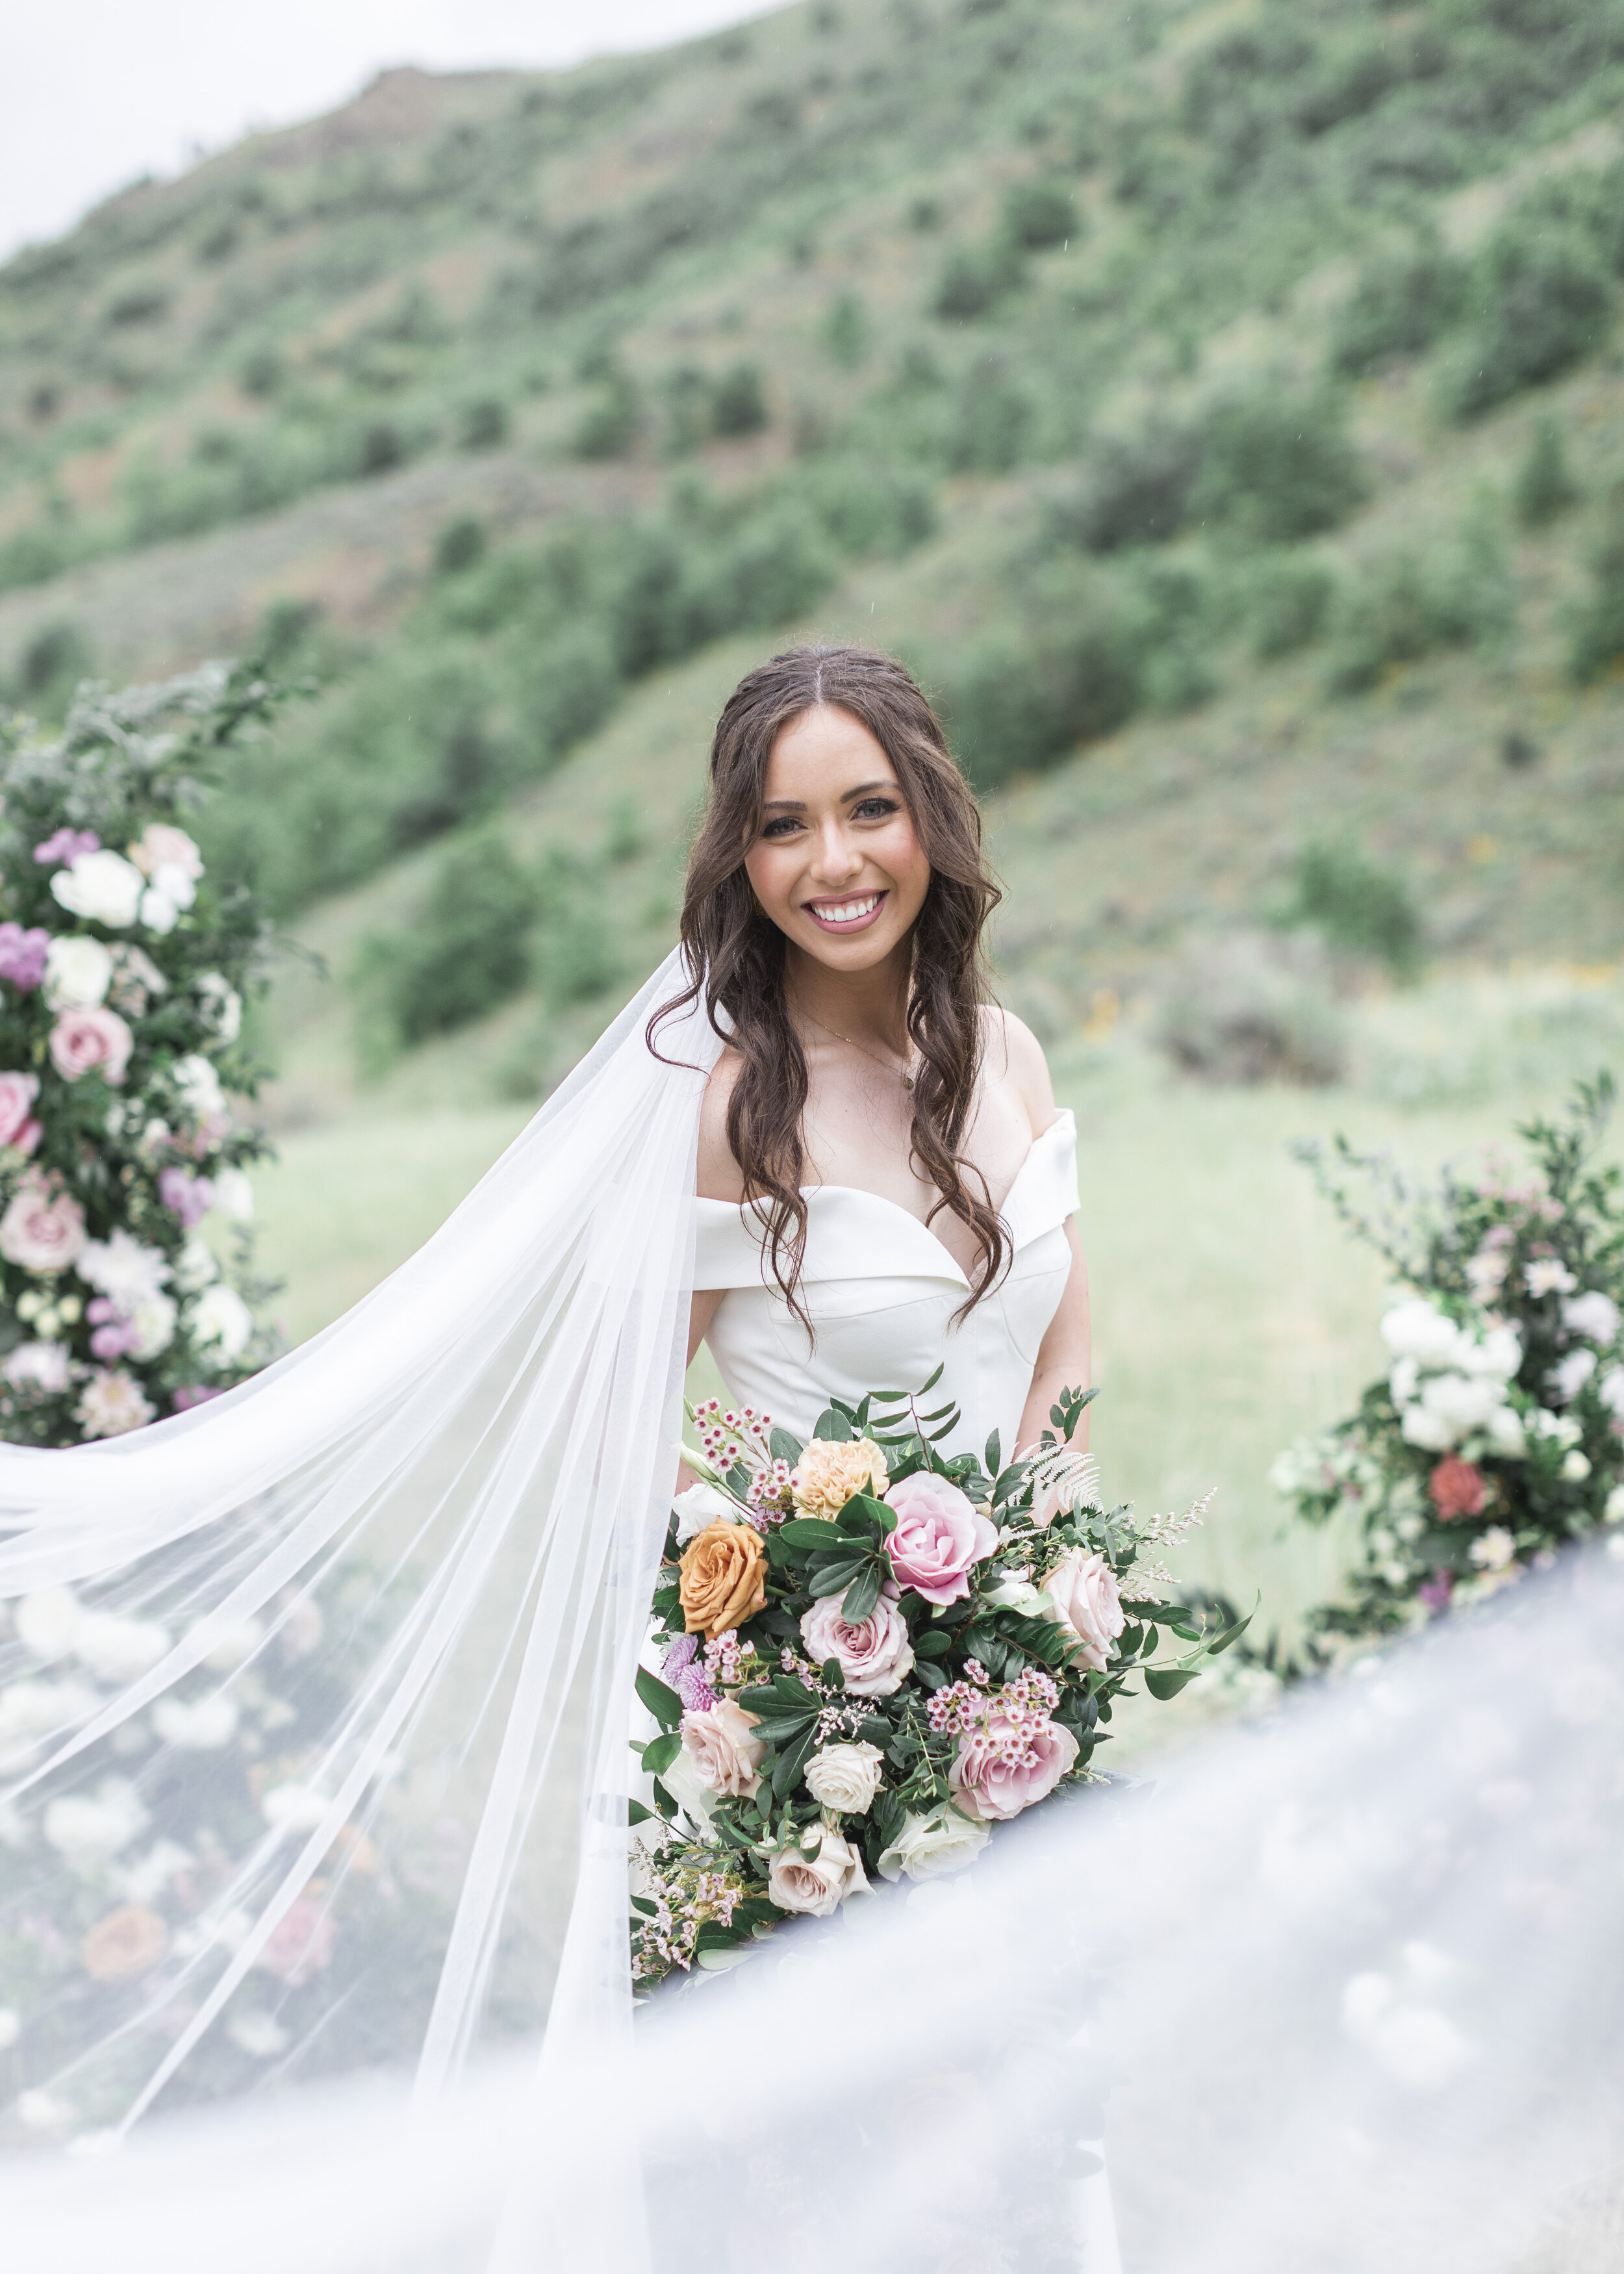  Veil photography by Clarity Lane Photography featuring a bride in the Logan mountains with rose bouquet during a photography workshop. bridal photography northern Utah wedding photographer #claritylanephotography #claritylaneweddings #claritylanewor